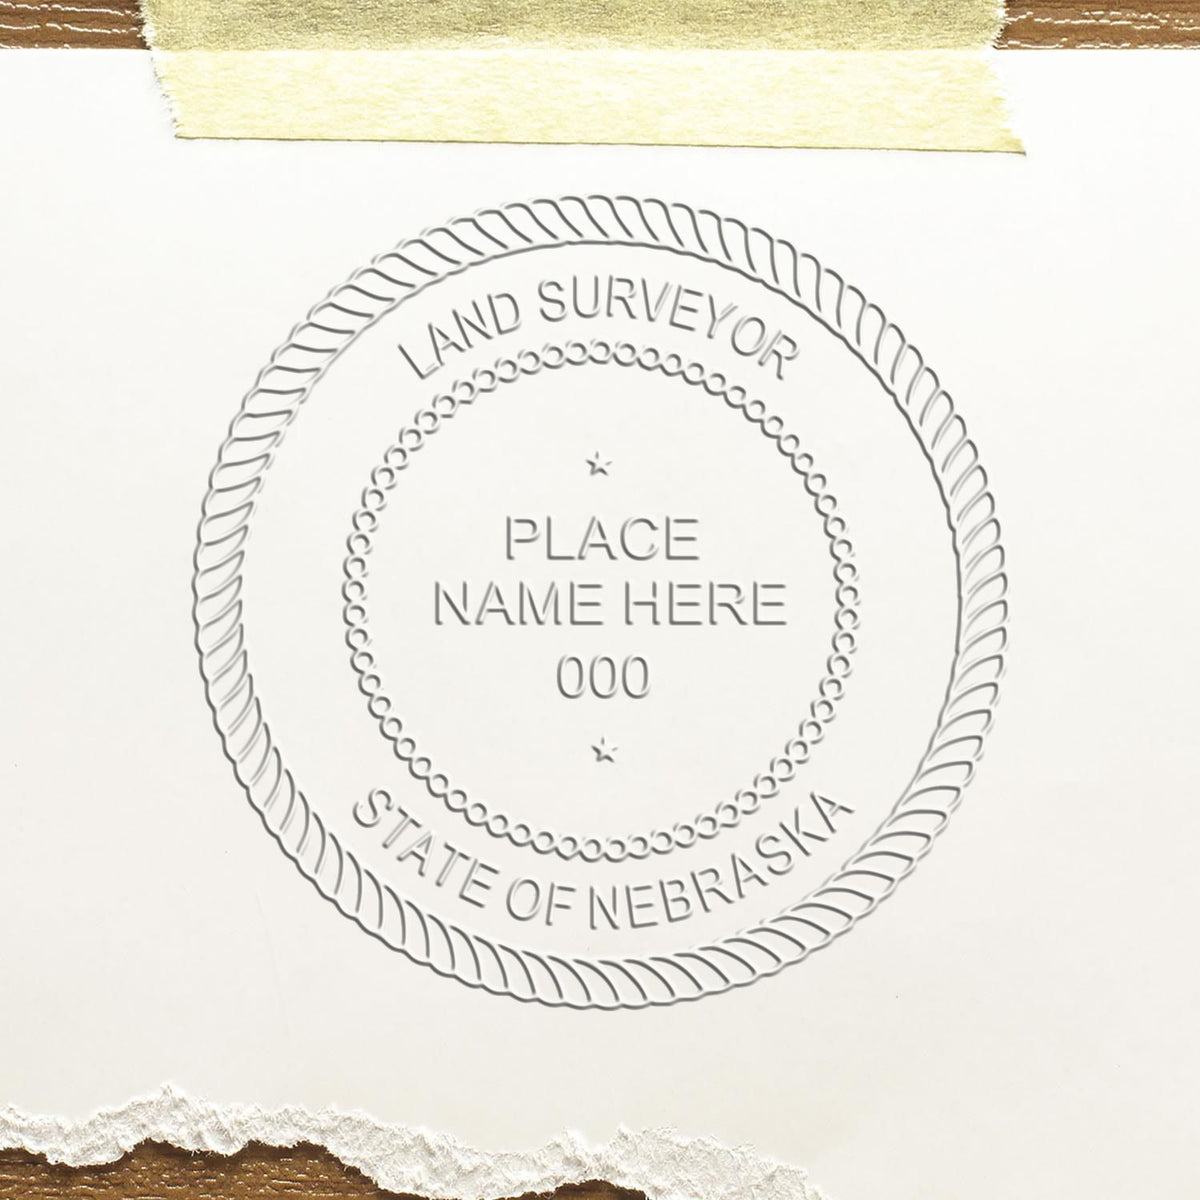 A stamped impression of the Nebraska Desk Surveyor Seal Embosser in this stylish lifestyle photo, setting the tone for a unique and personalized product.